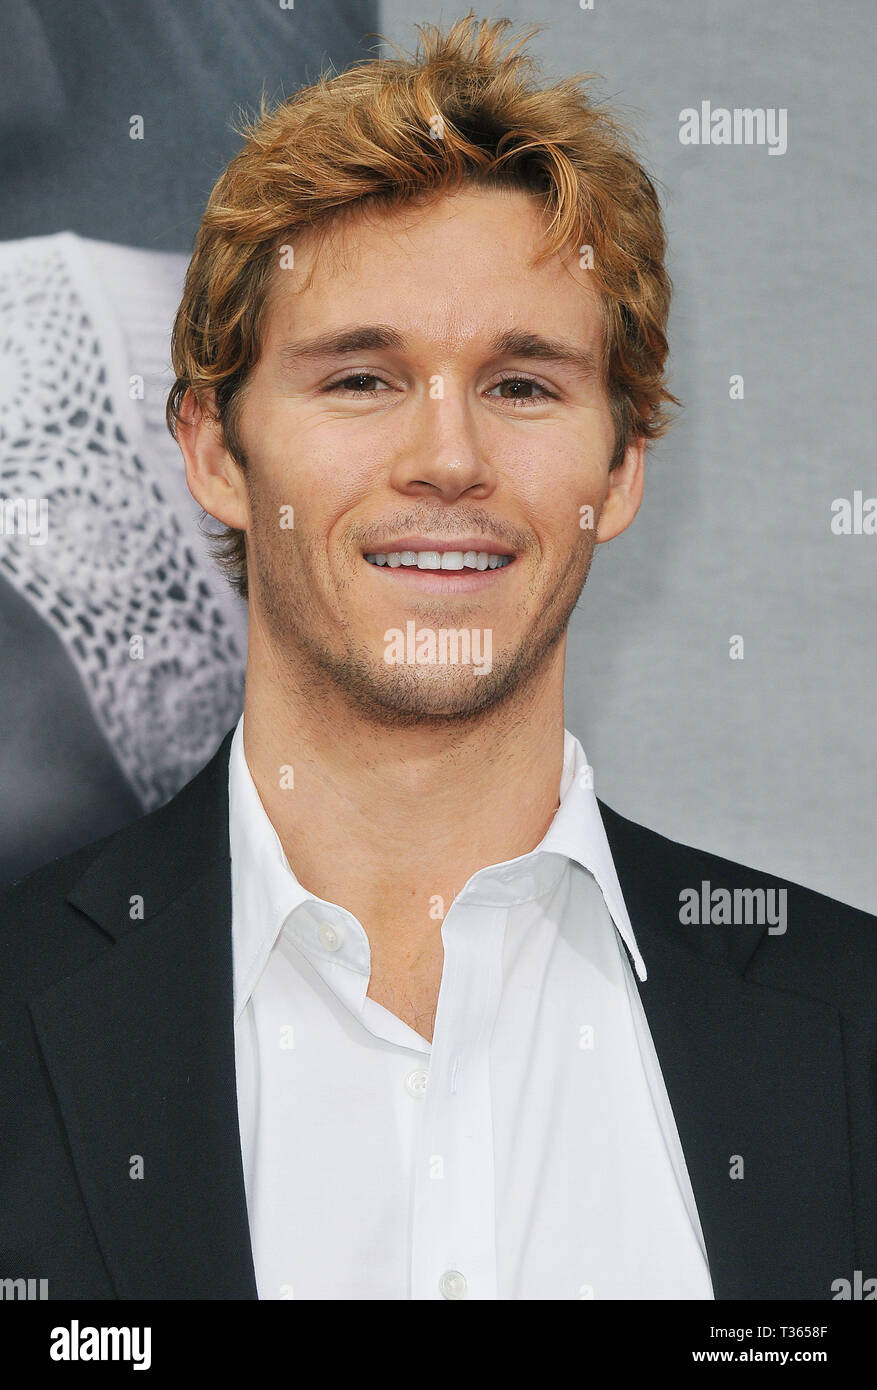 Ryan Kwanten  - True Blood - season 2 premiere at the Paramount Theatre In Los Angeles.04 KwantenRyan 04 Red Carpet Event, Vertical, USA, Film Industry, Celebrities,  Photography, Bestof, Arts Culture and Entertainment, Topix Celebrities fashion /  Vertical, Best of, Event in Hollywood Life - California,  Red Carpet and backstage, USA, Film Industry, Celebrities,  movie celebrities, TV celebrities, Music celebrities, Photography, Bestof, Arts Culture and Entertainment,  Topix, headshot, vertical, one person,, from the year , 2009, inquiry tsuni@Gamma-USA.com Stock Photo